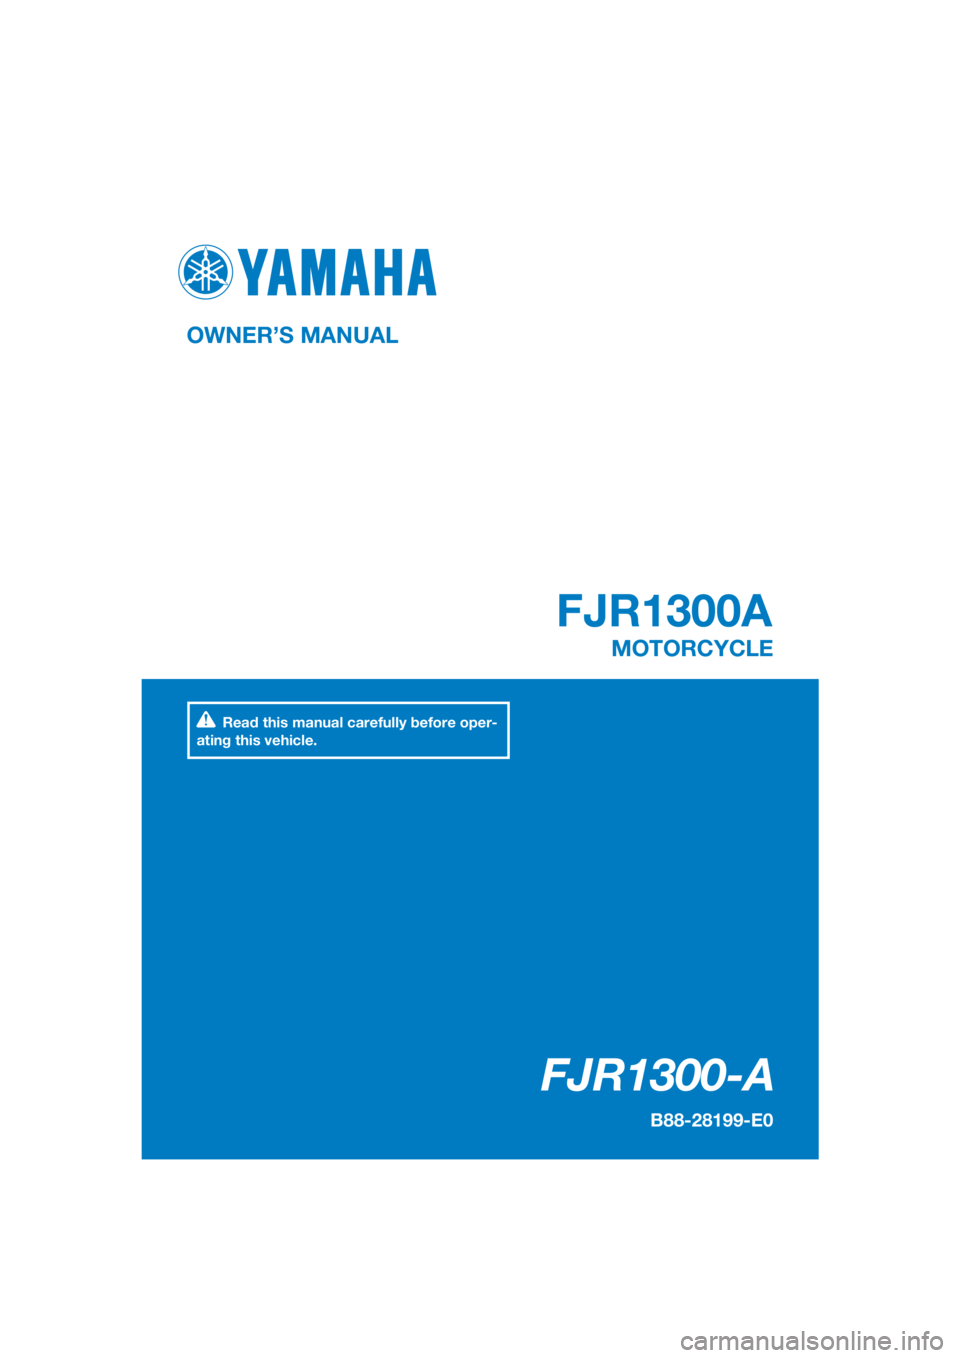 YAMAHA FJR1300A 2016  Owners Manual DIC183
FJR1300-A
FJR1300A
OWNER’S MANUAL
B88-28199-E0
MOTORCYCLE
[English  (E)]
Read this manual carefully before oper-
ating this vehicle. 